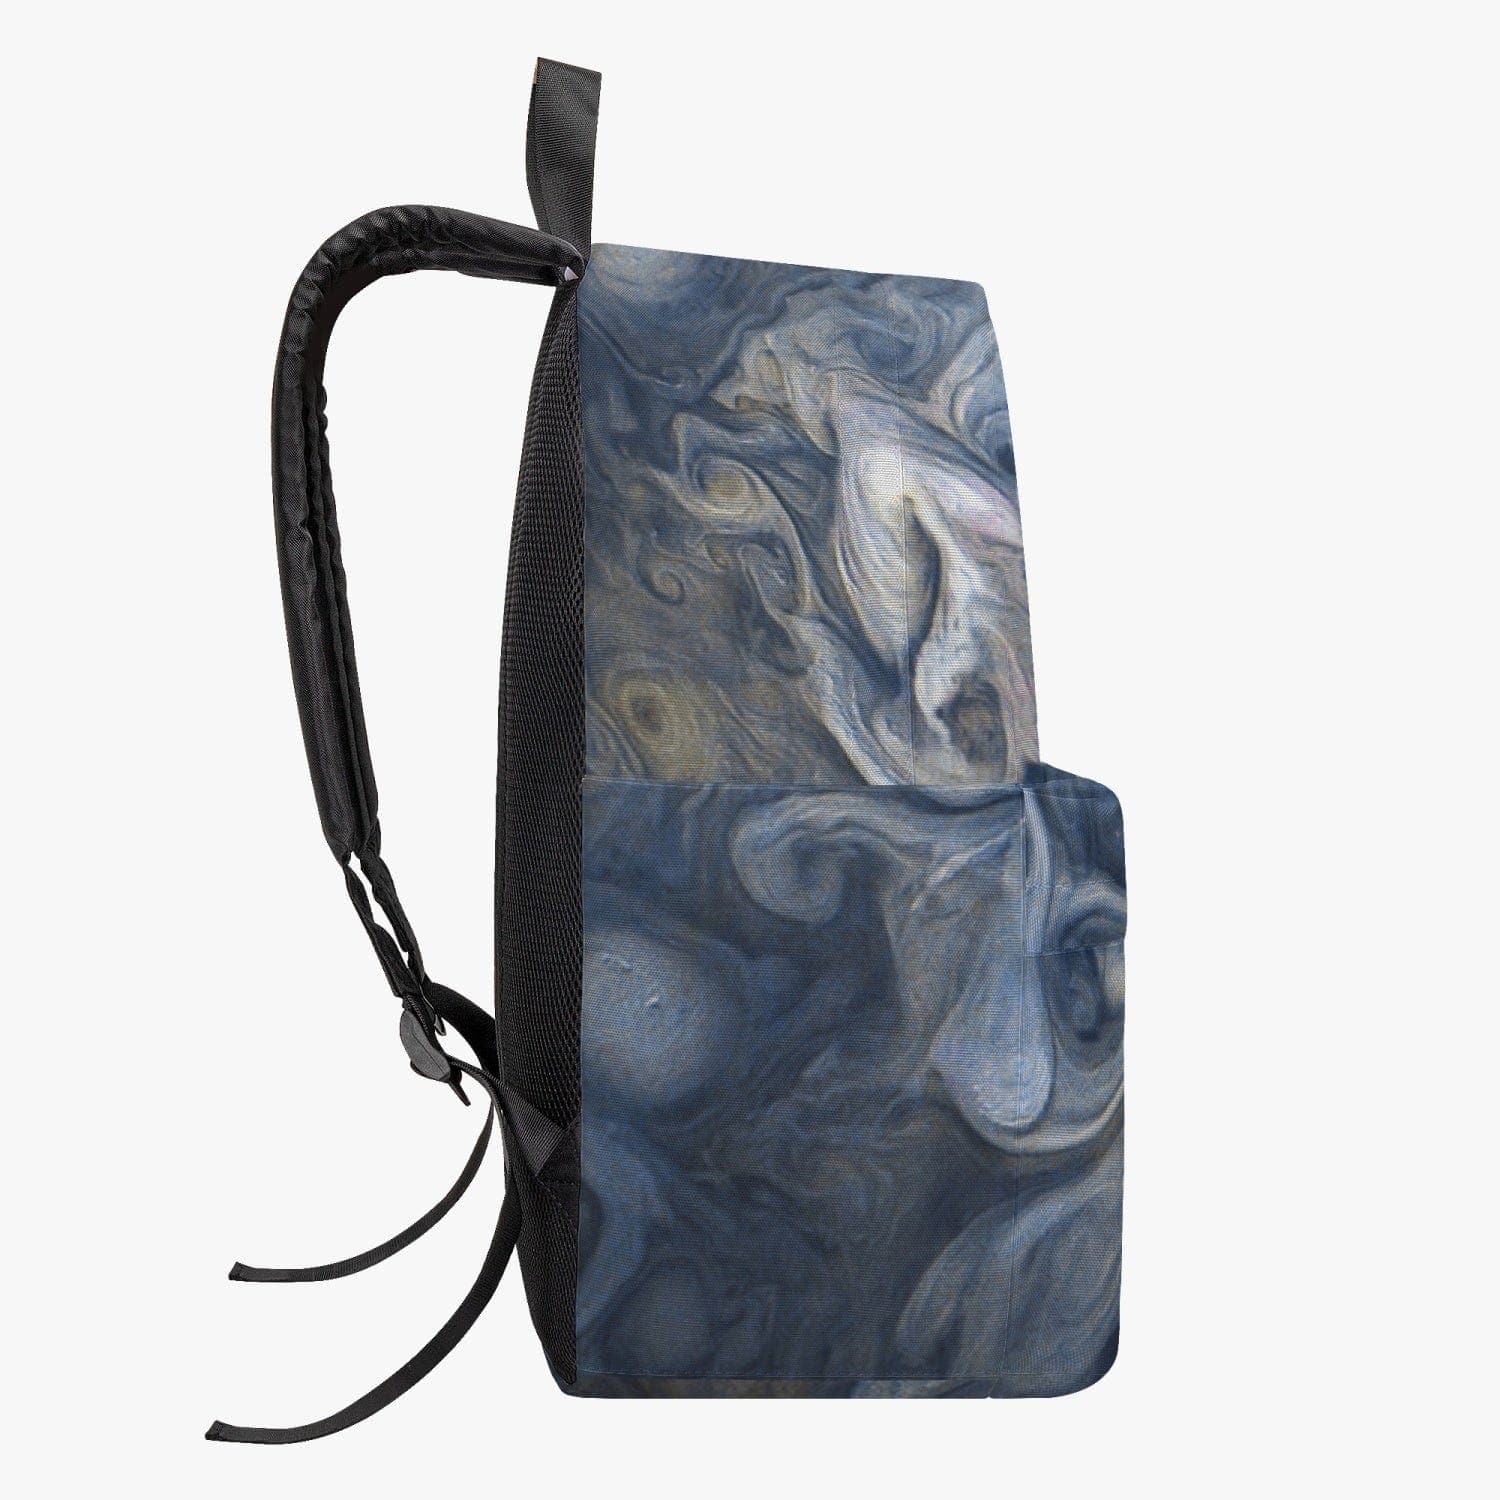 Jupiter South pole, All-over-print Canvas Backpack, by Sensus Studio